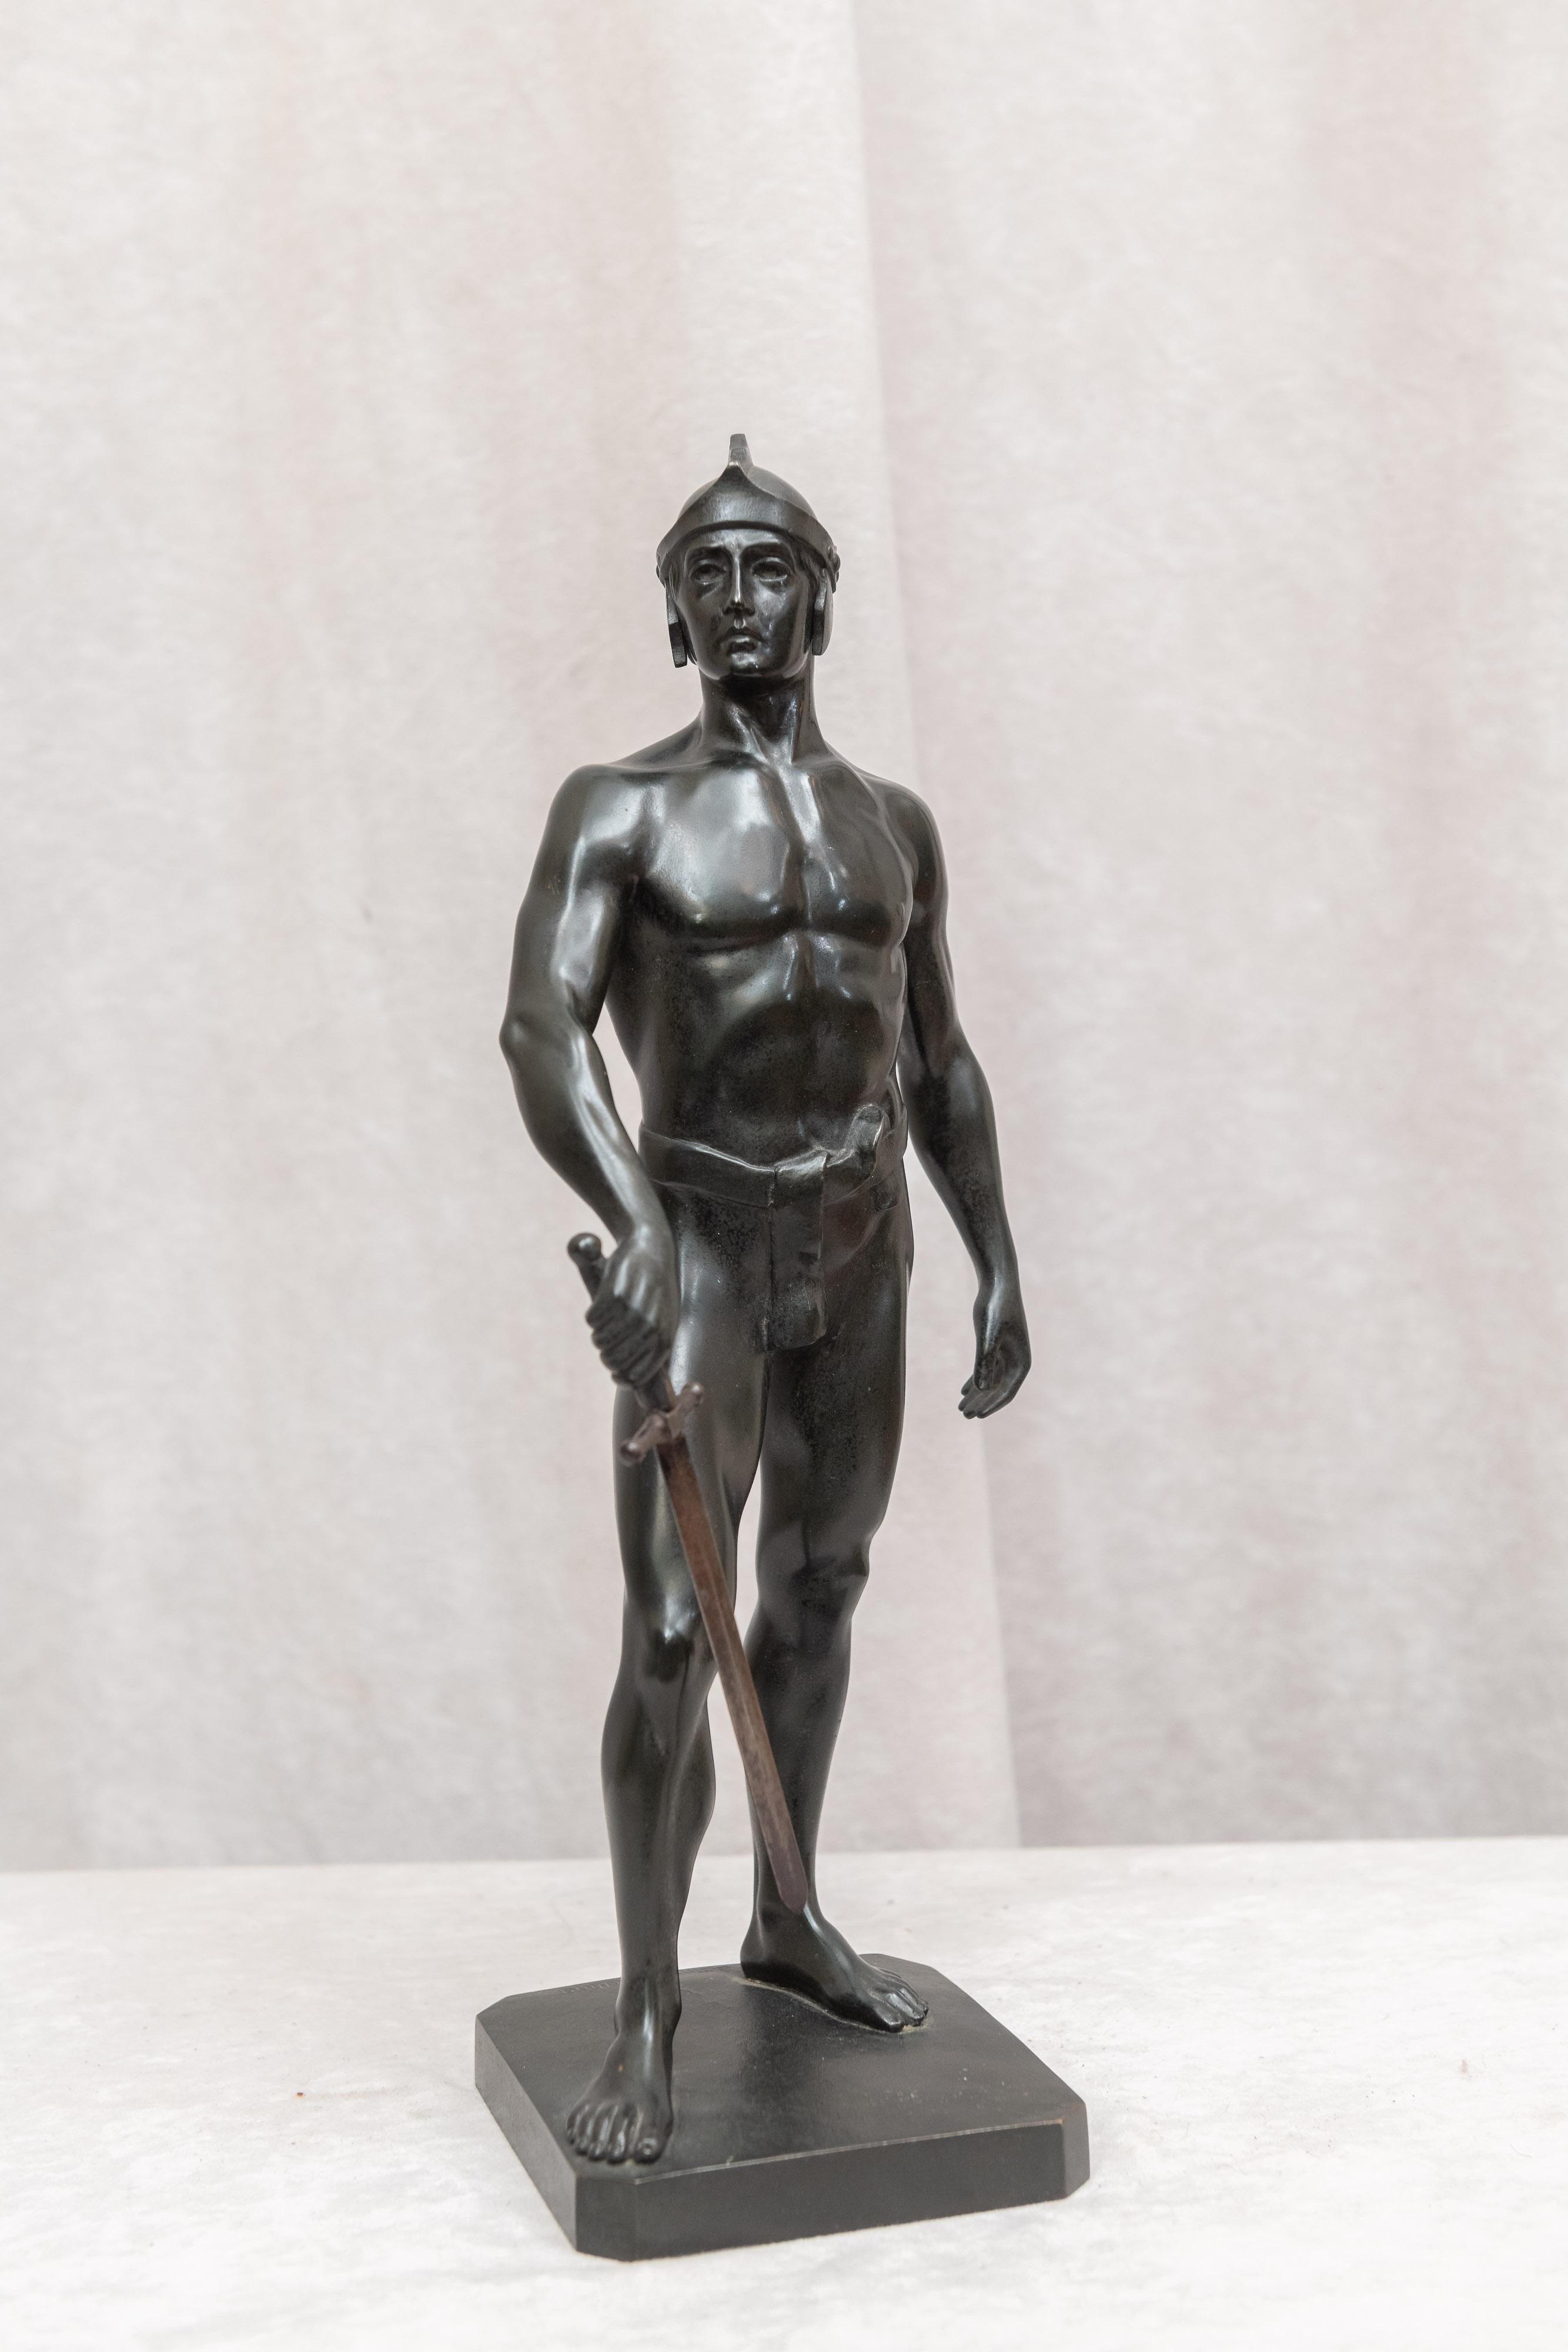 This very proud young warrior is signed my the noted German artist Schmidt-Felling 1835-1920. He is on Wikipedia if you wish to learn more about him. We have sold many fine bronze sculptures by this artist in our over 40 years of selling antique